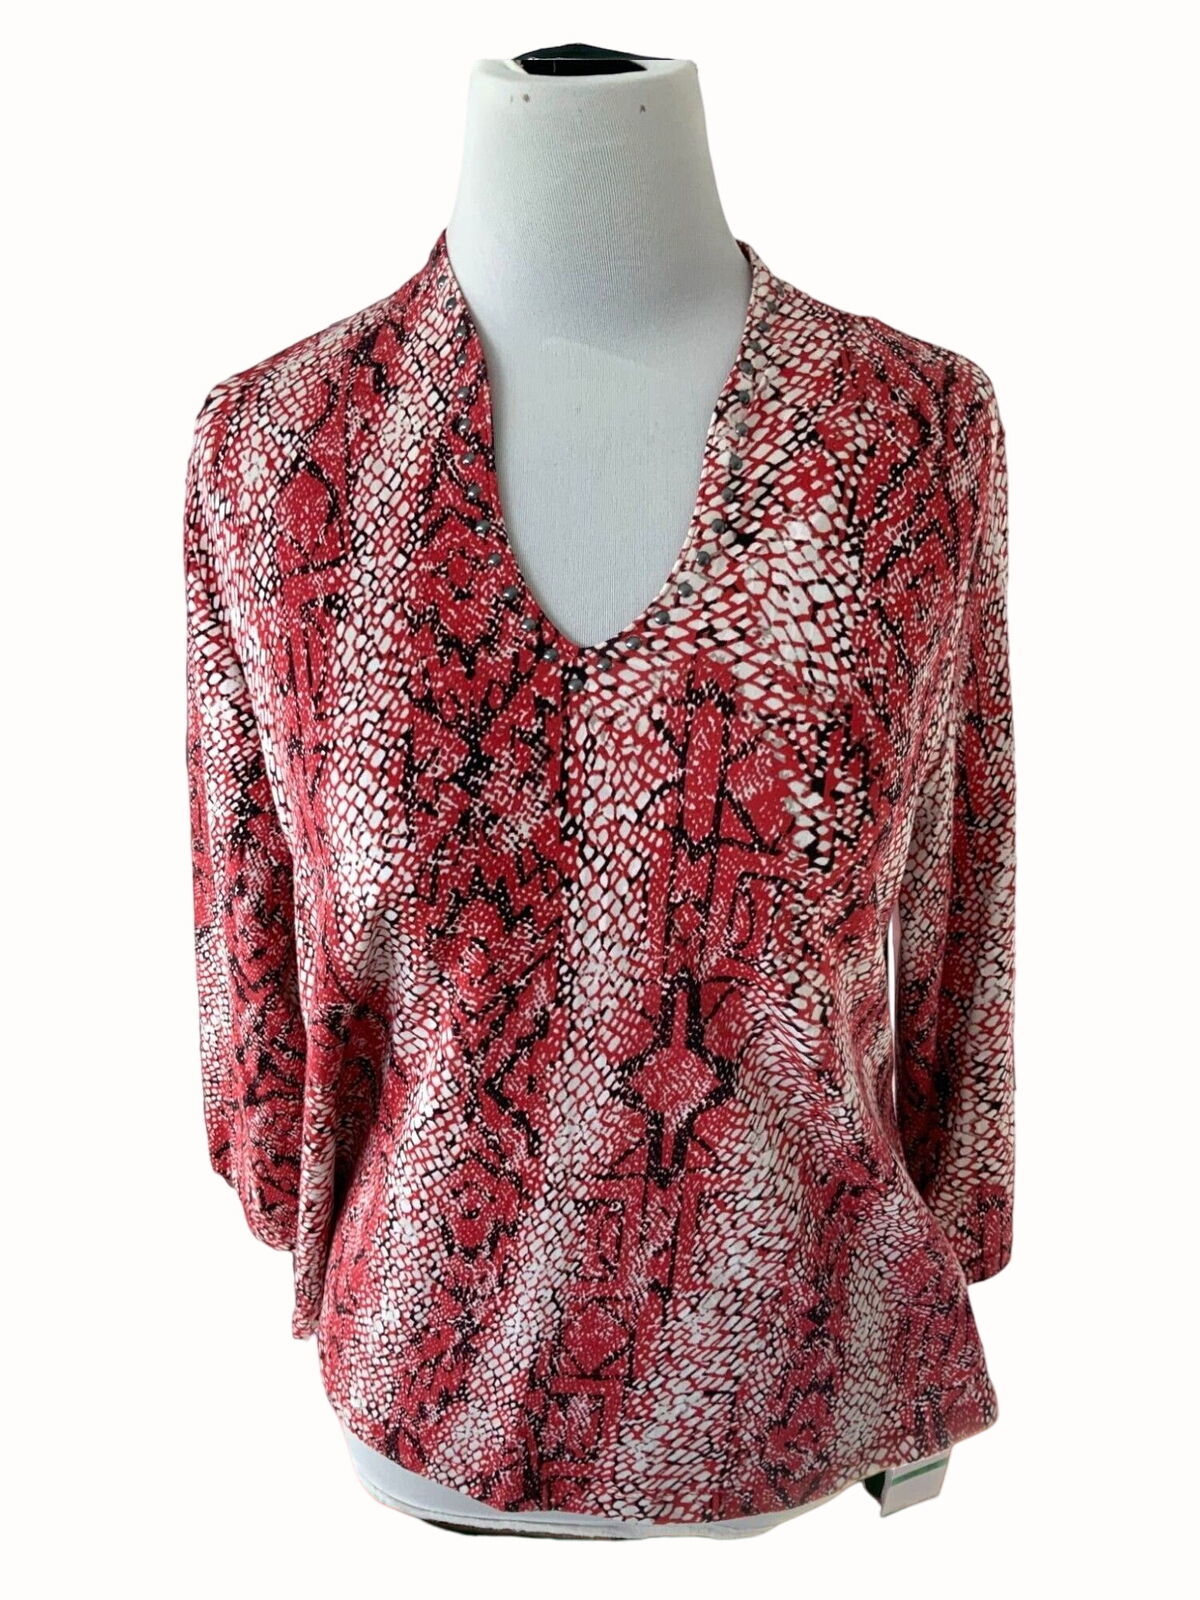 Primary image for Hearts of Palm Petite red animal patterned quarter sleeve vneck blouse NEW PL